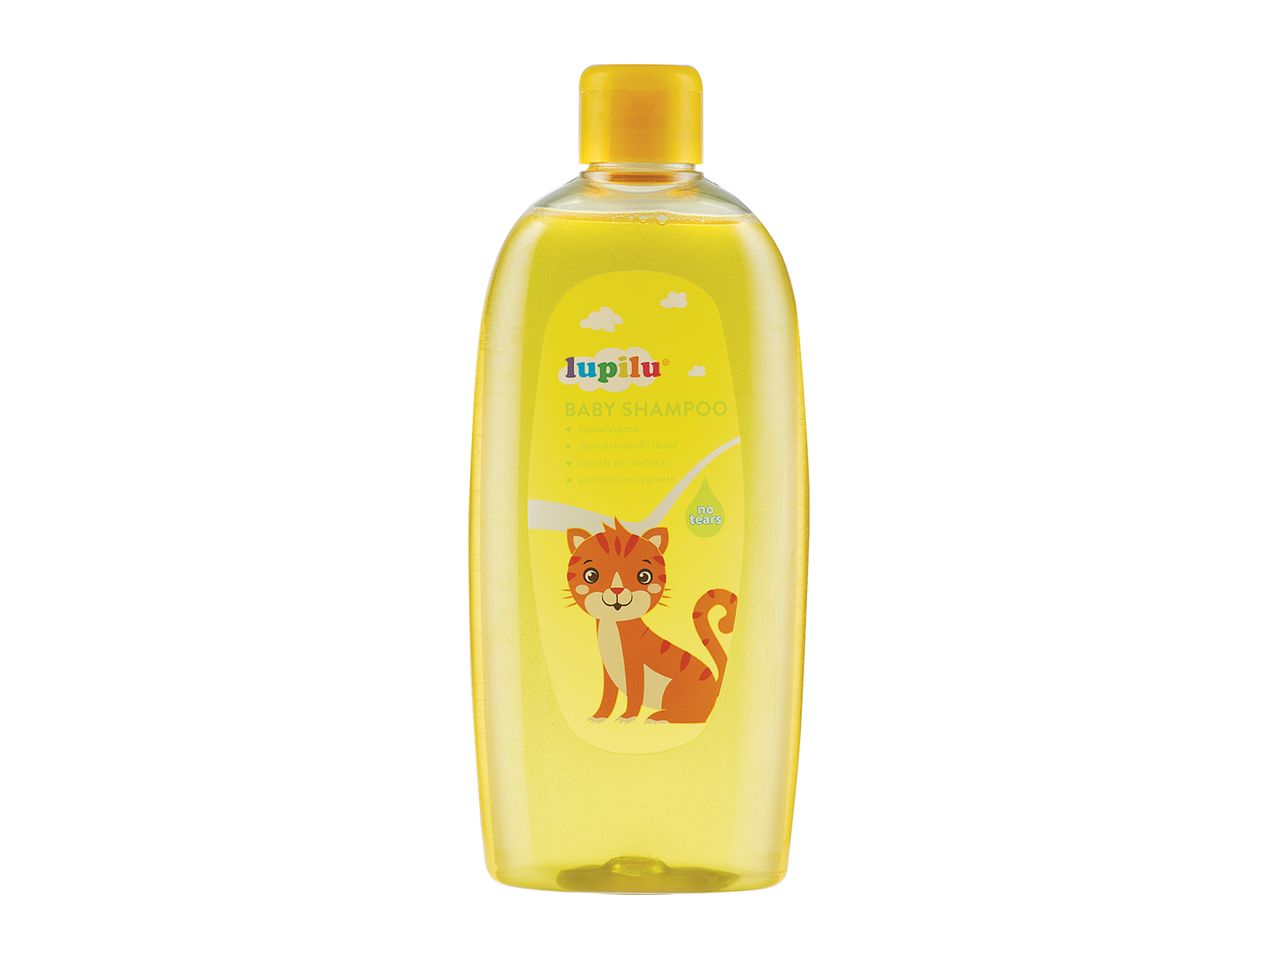 Go to full screen view: Lupilu Baby Shampoo - Image 1